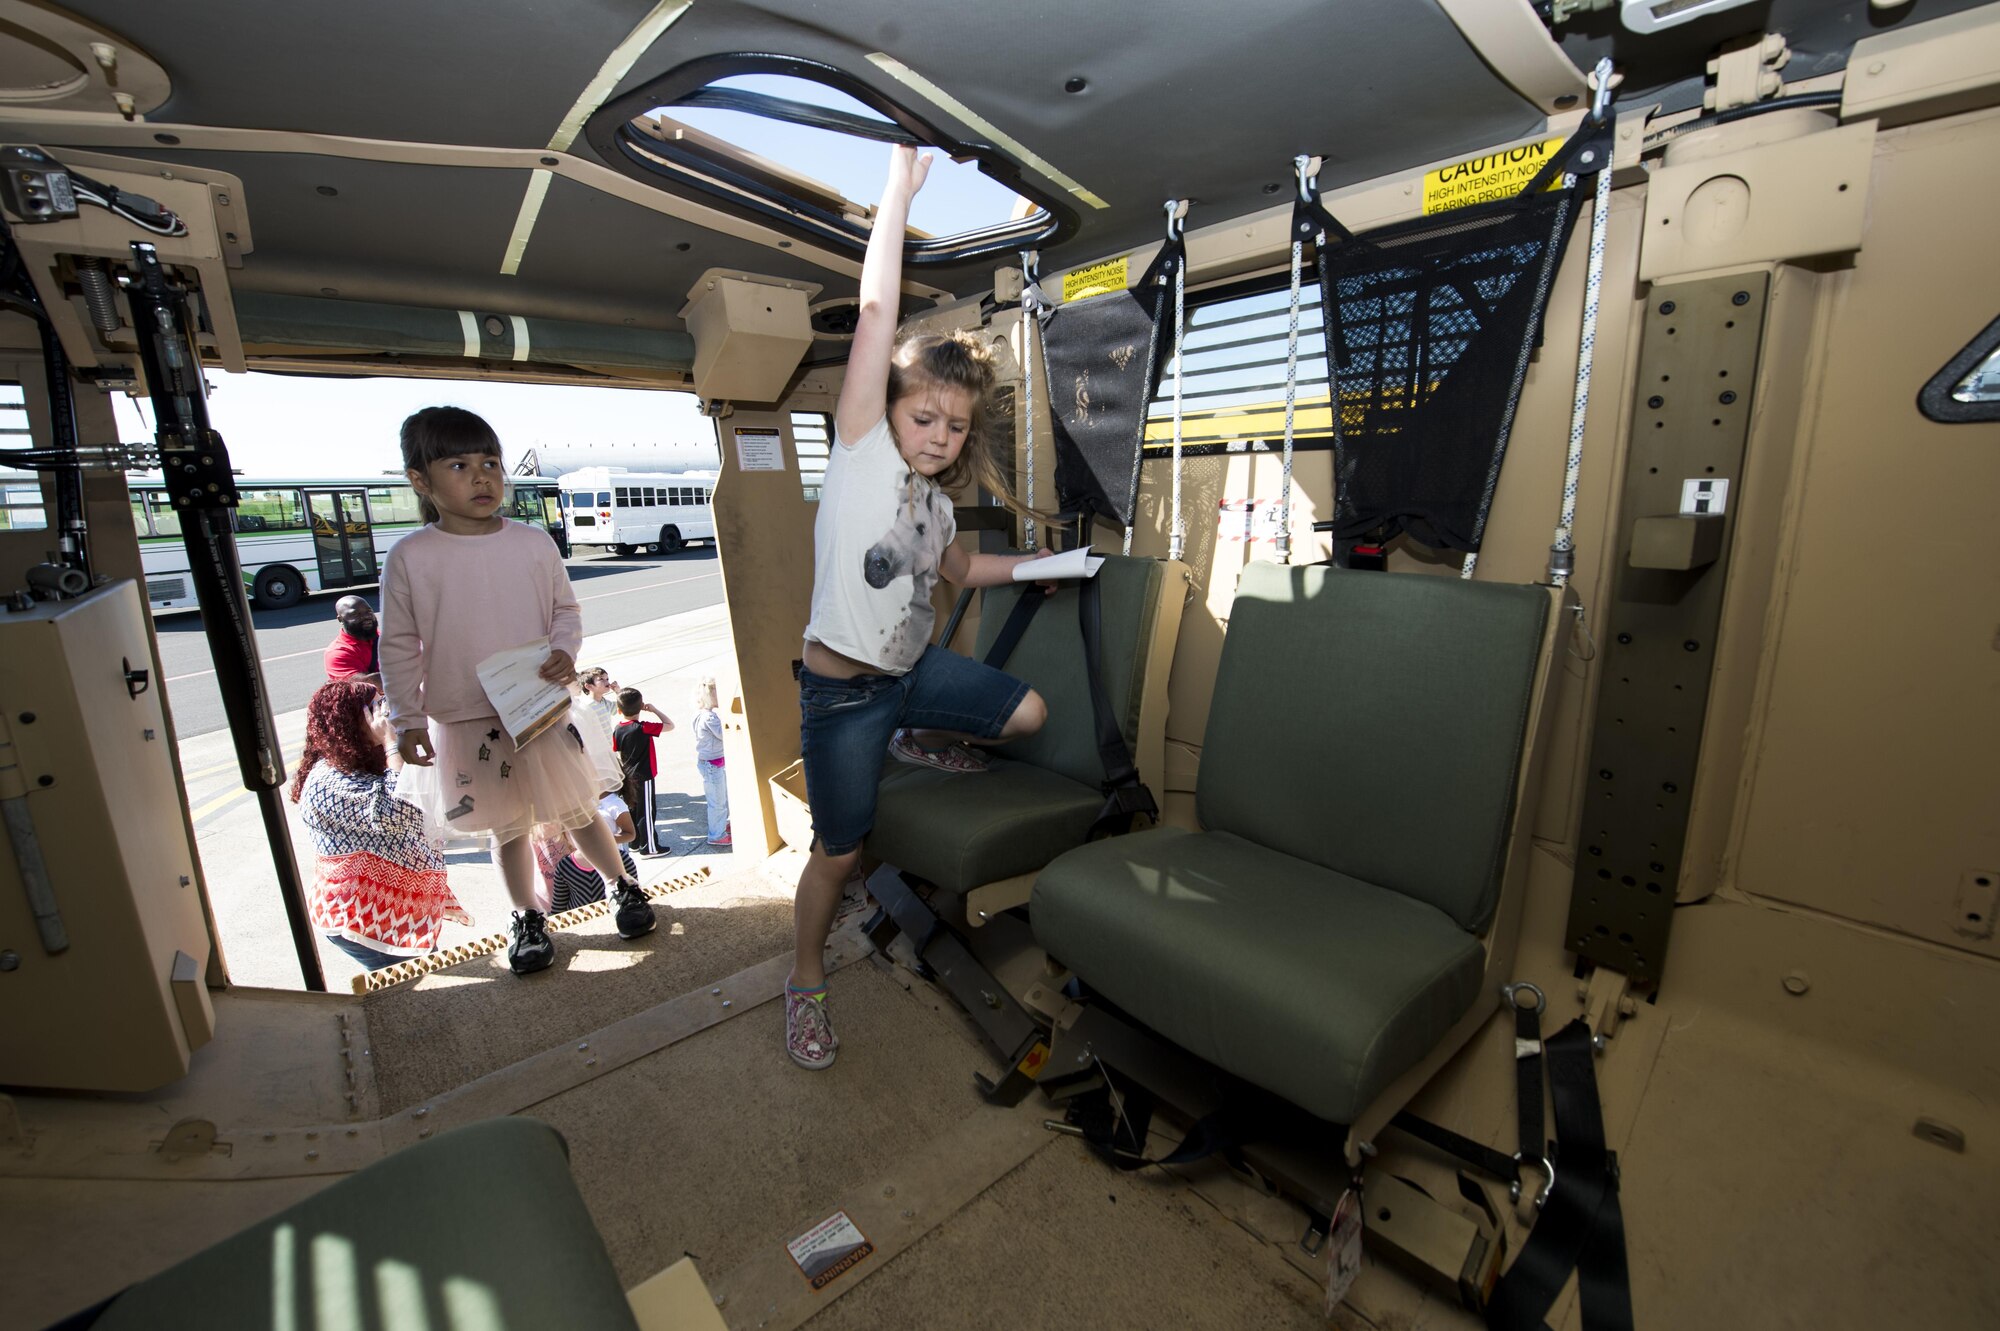 Students from Spangdahlem Elementary School explore an armored vehicle during Children’s Deployment Days at Spangdahlem Air Base, Germany, May 22, 2017. The deployment line featured several sections to inform children about deploying, including a pre-deployment brief, a look at deployment gear, mock immunizations, static vehicle displays and a tour of a C-17 Globemaster III aircraft. (U.S. Air Force photo by Airman 1st Class Preston Cherry)